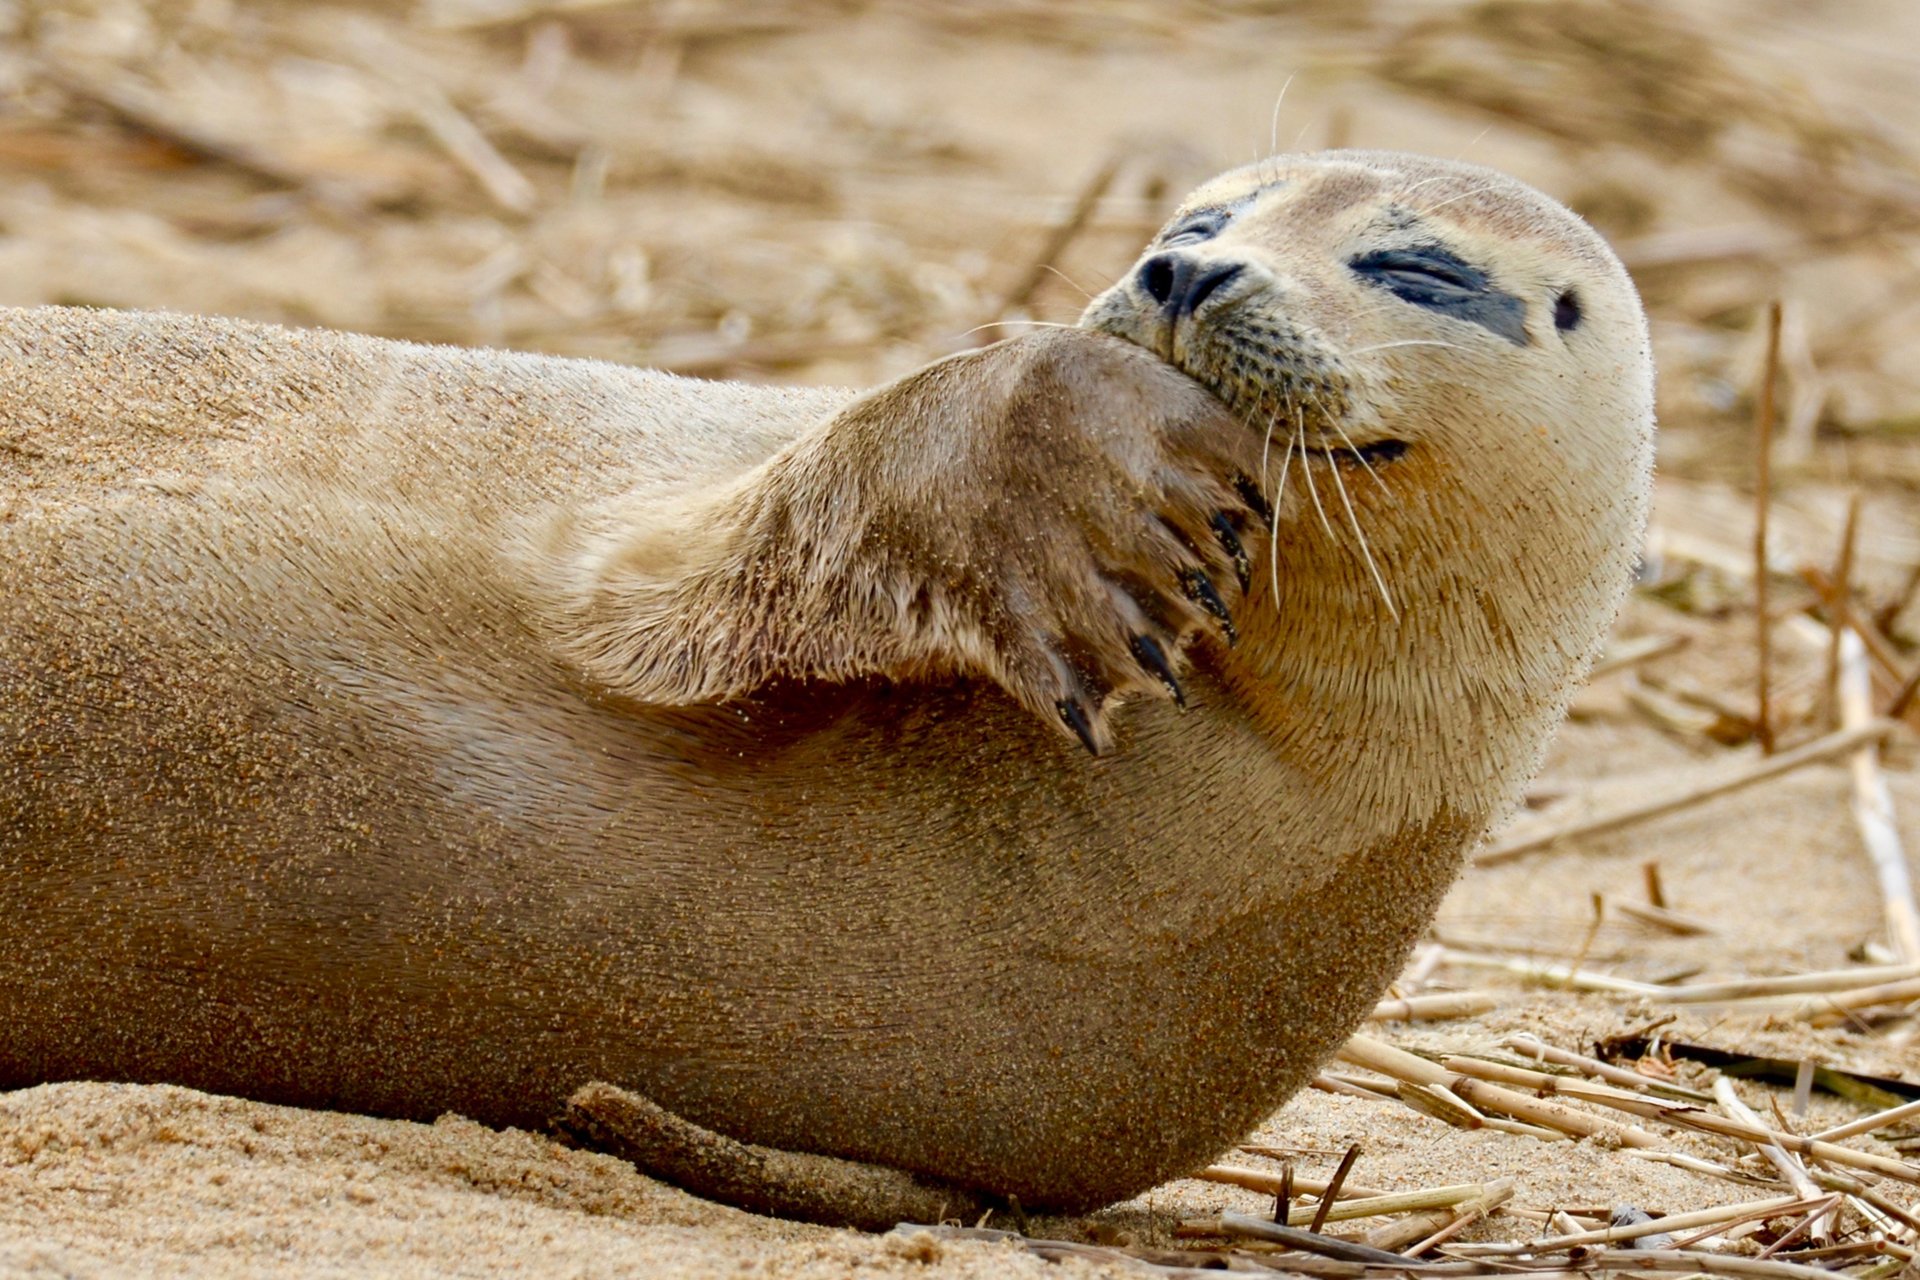 A seal lying down, which seems to be smiling and covering its mouth